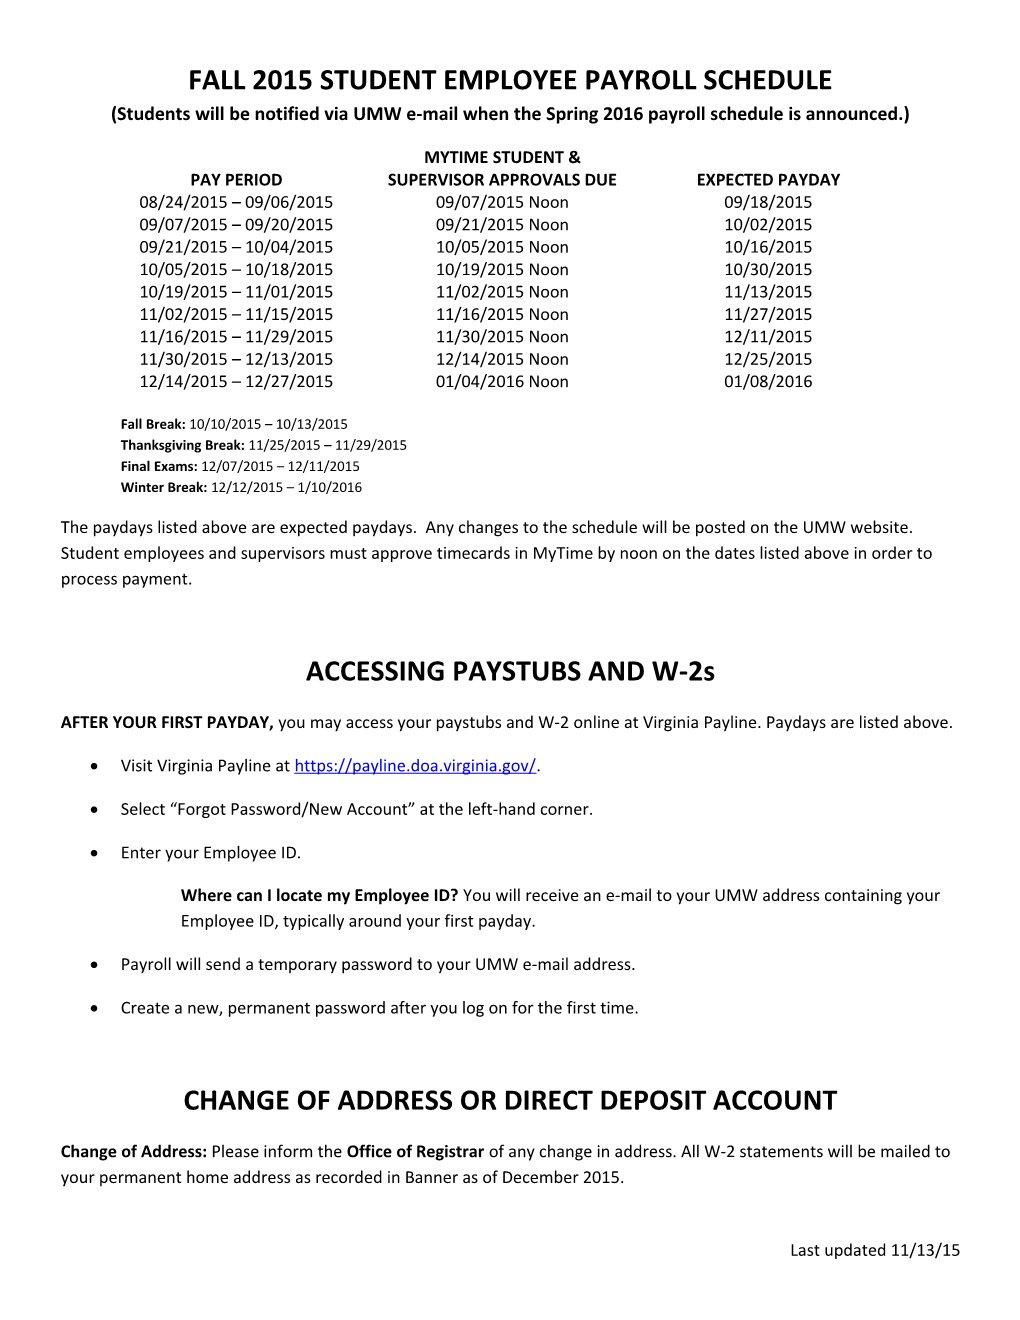 FALL 2015 STUDENT EMPLOYEE PAYROLL SCHEDULE (Students Will Be Notified Via UMW E-Mail